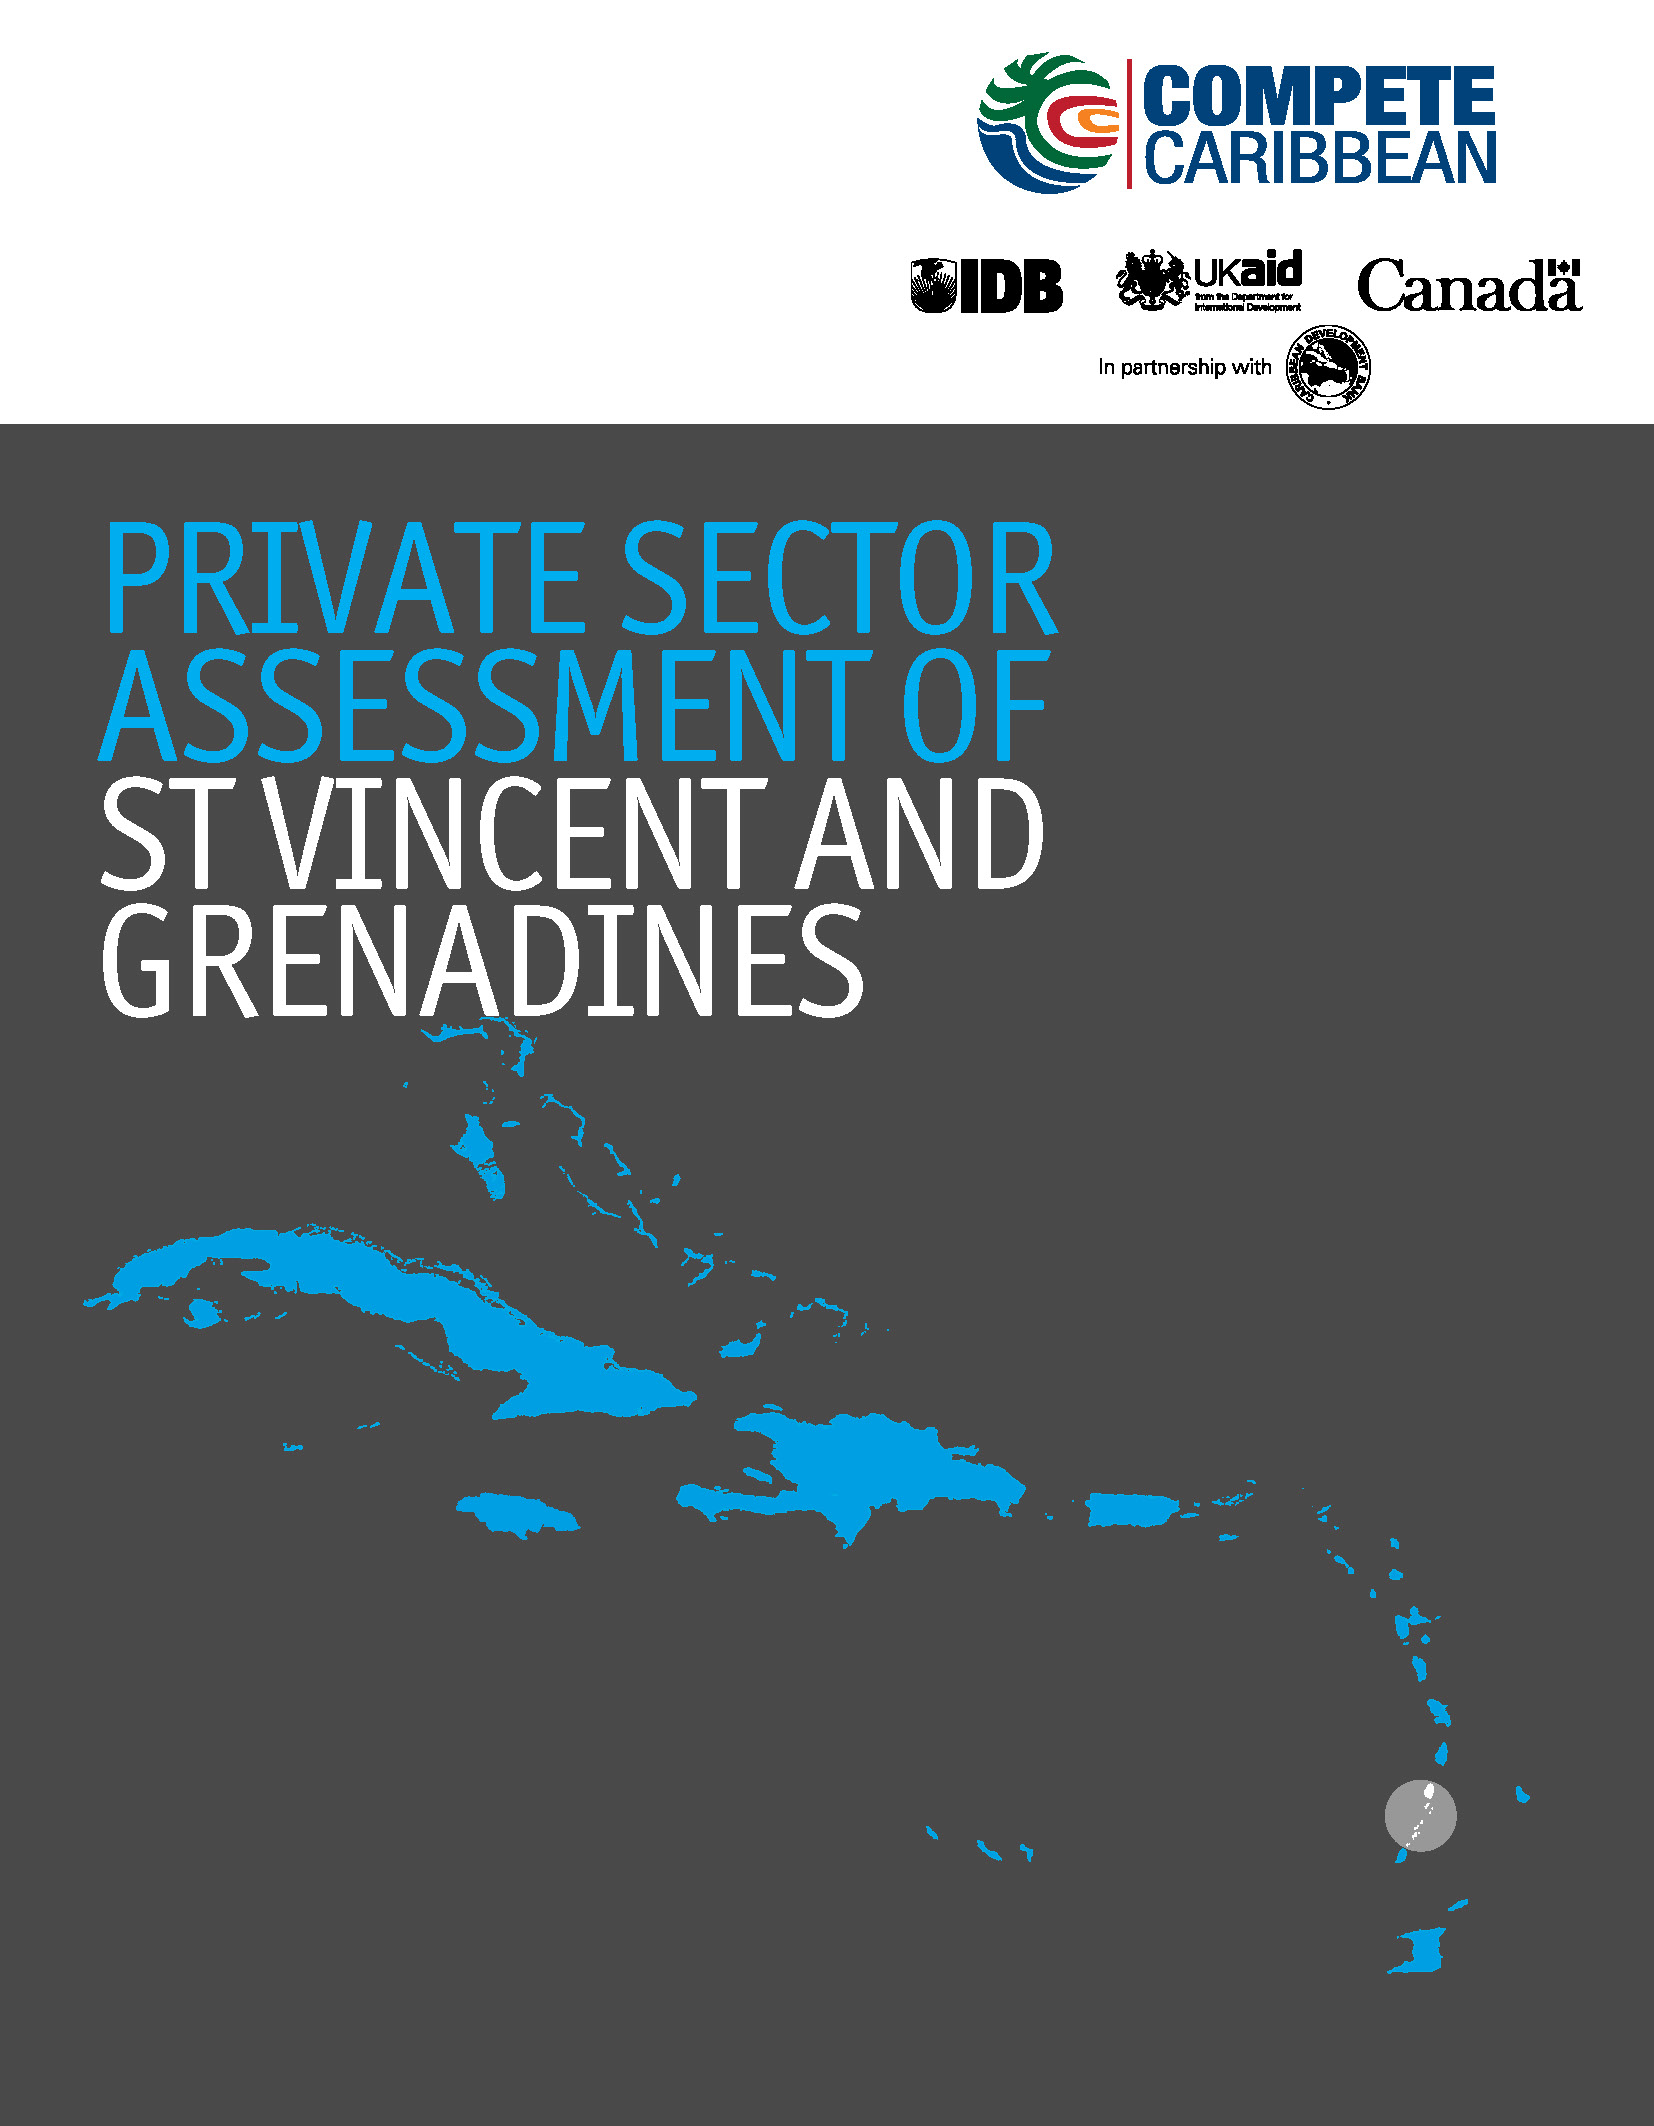 cover showing island chain with Saint Vincent and the Grenadines highlighted